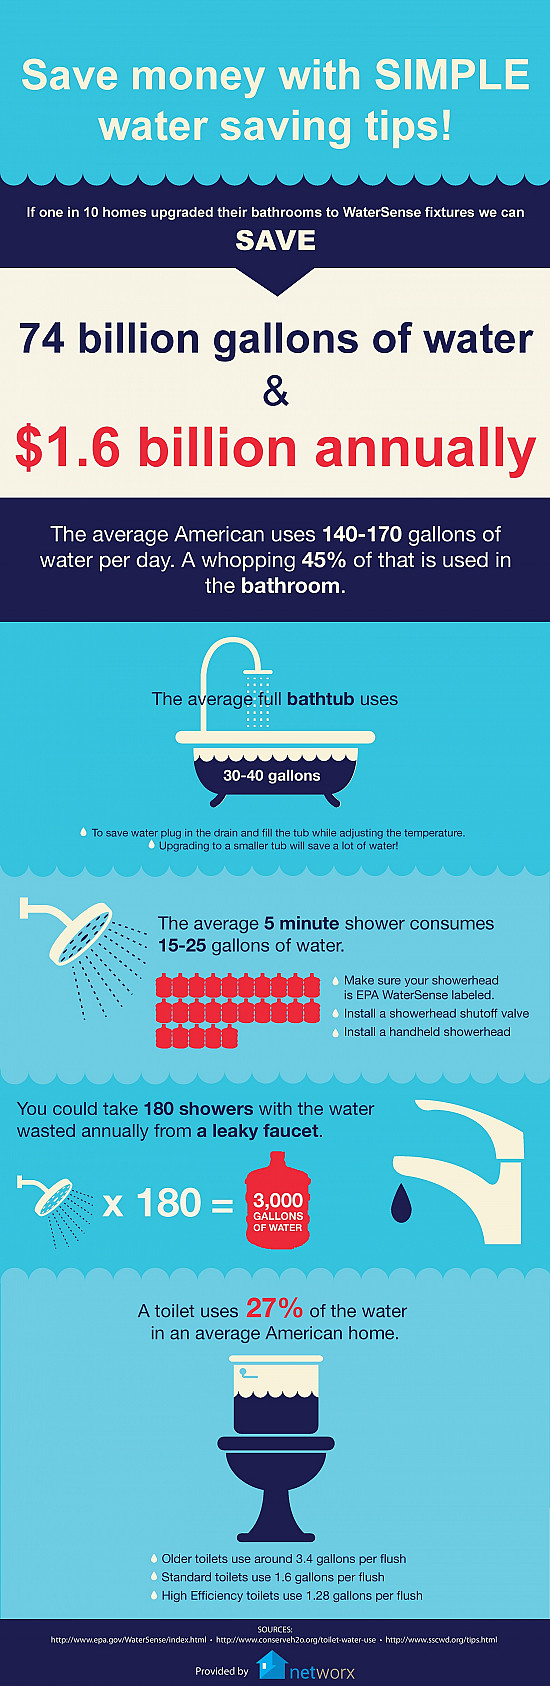 Networx - Infographic: Save Water, Save Money